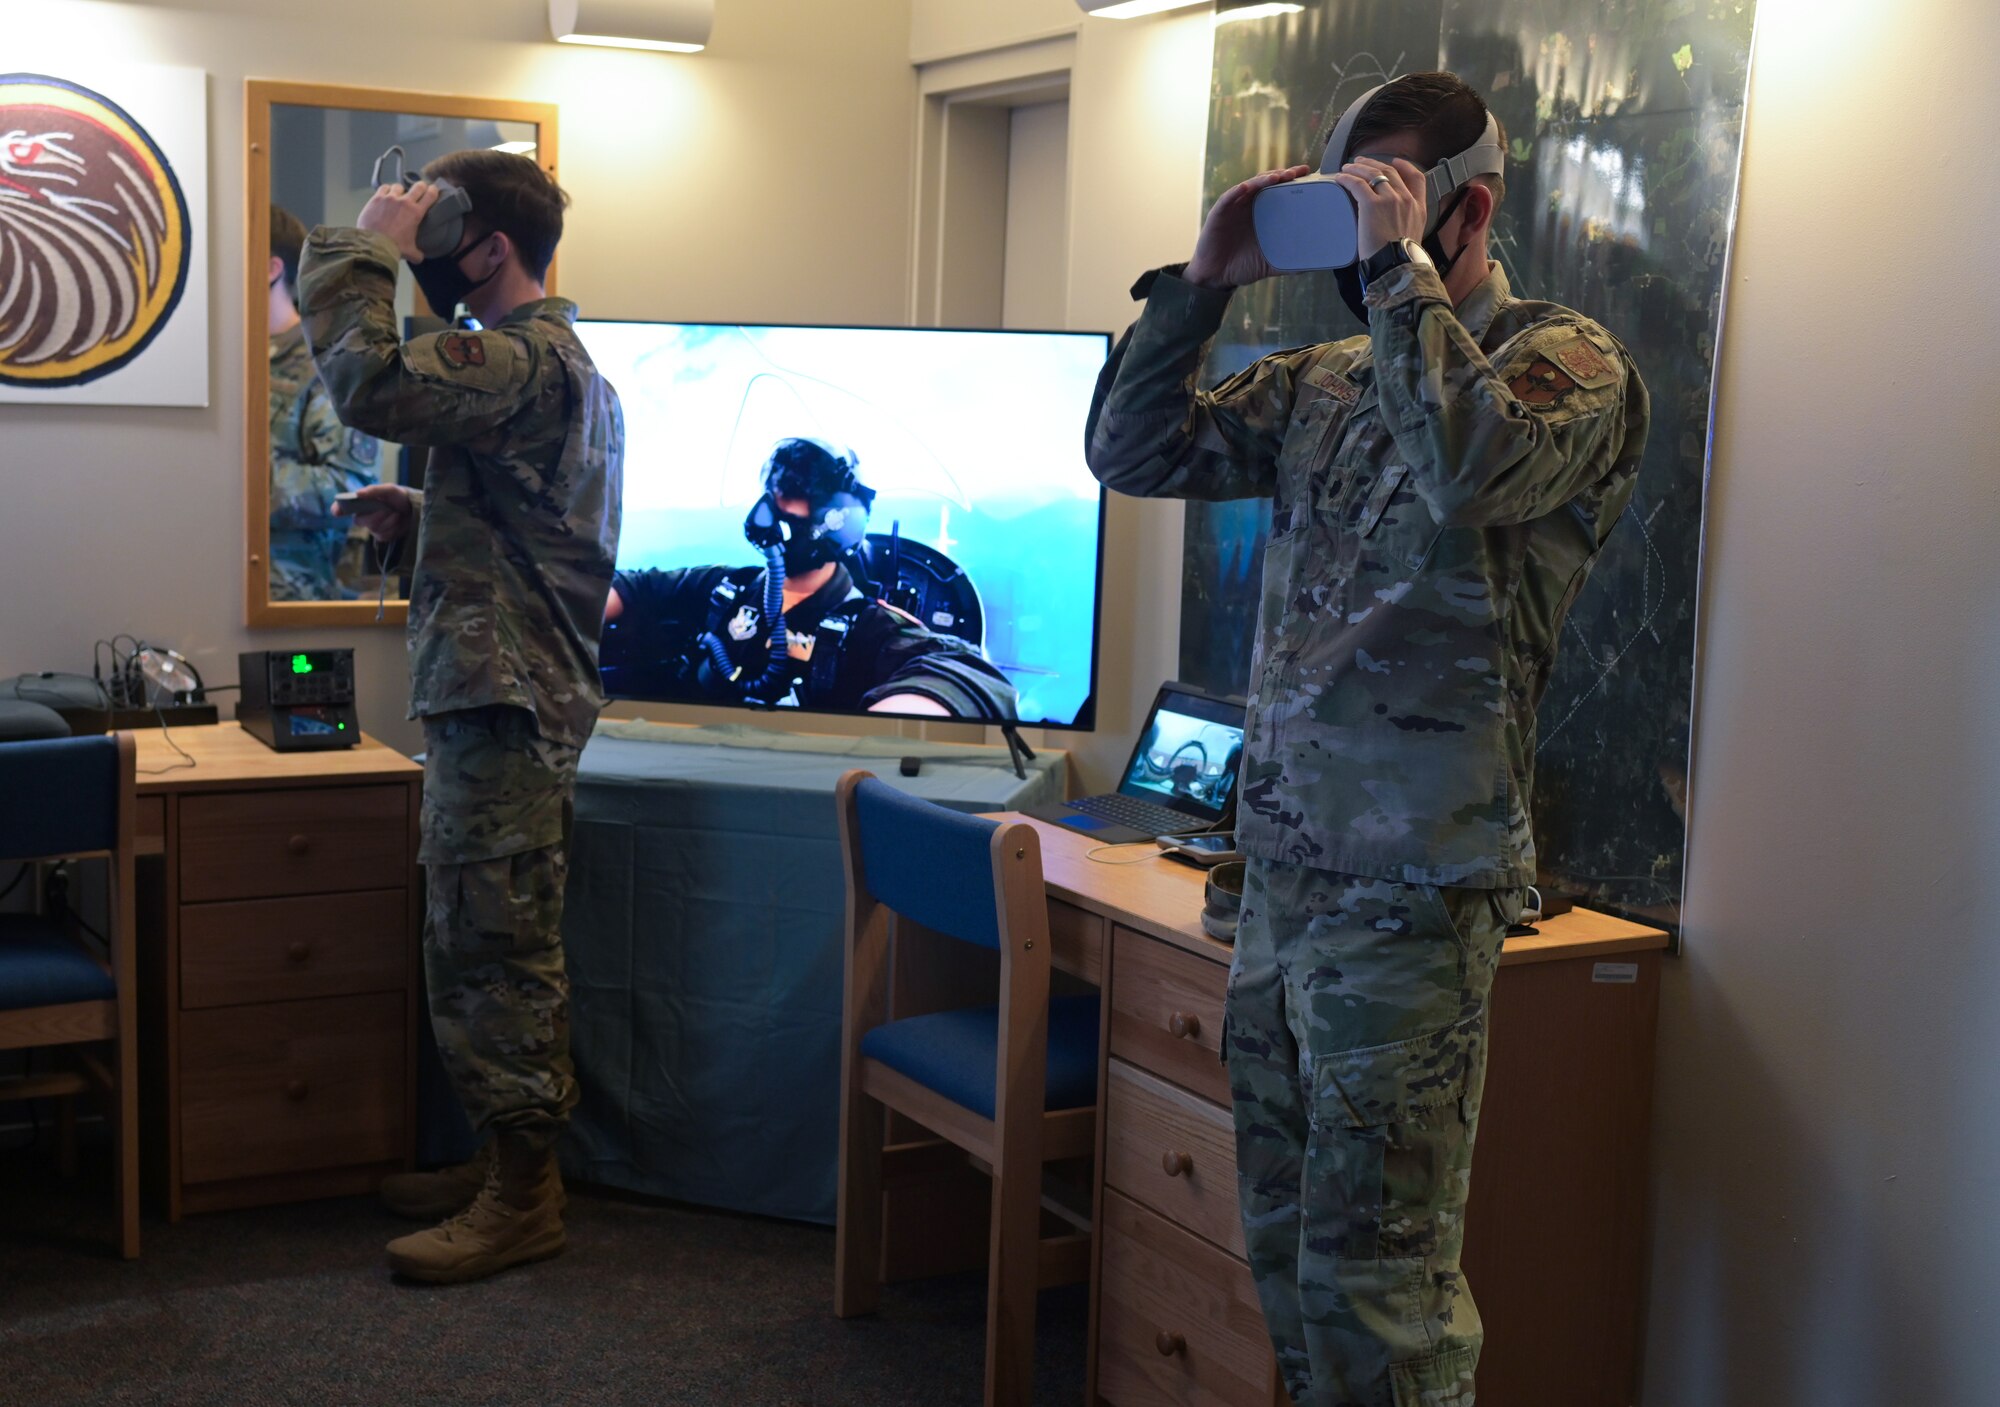 U.S. Air Force Lt. Col. Tyler Johnson, 14th Civil Engineer Squadron commander (Right), and 2nd Lt. Connor Spencer, 14th Student Squadron student pilot, test out a virtual reality training system recently installed for student pilots, Feb. 12, 2021, on Columbus Air Force Base, Miss. Student pilots assigned to the Specialized Undergraduate Pilot Training program will have 24 hour access to the training resources as part of the first step in a long term innovation and resource utilization plan. (U.S. Air Force photo by Senior Airman Jake Jacobsen)